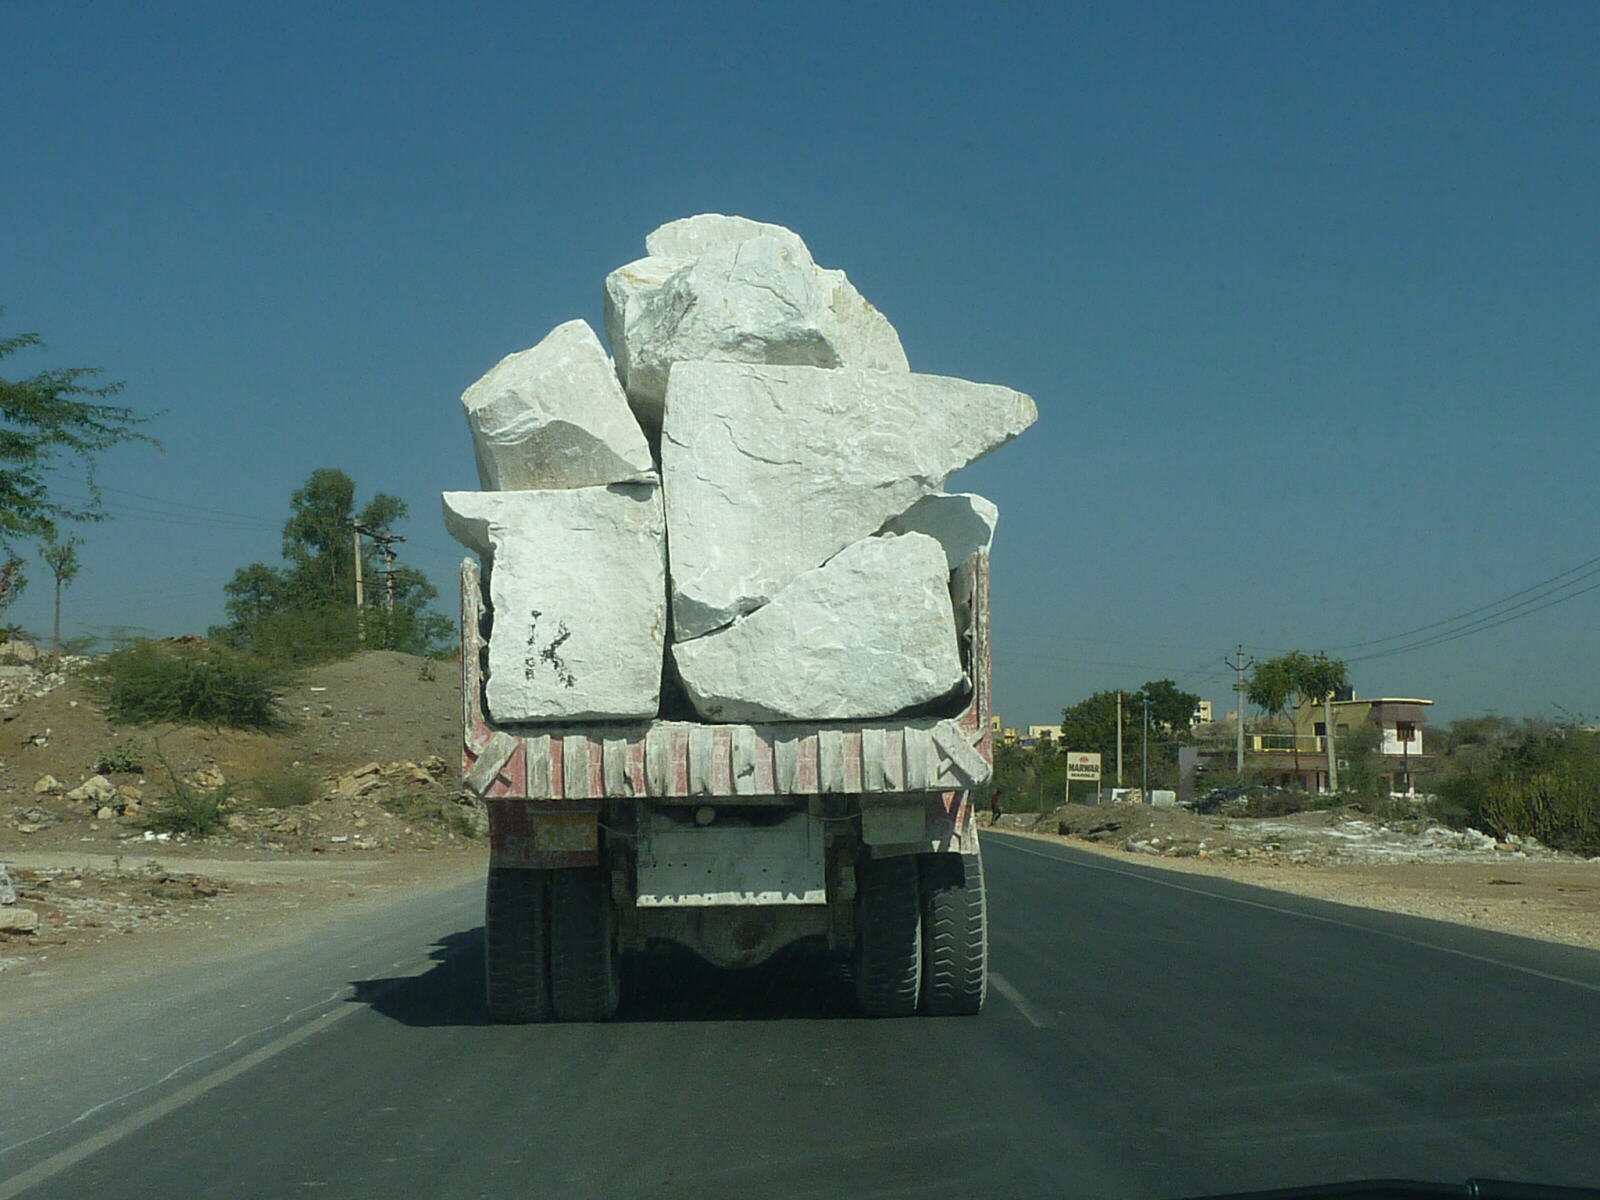 Marble blocks on a lorry between Udaipur and Pushkar, Rajasthan, India